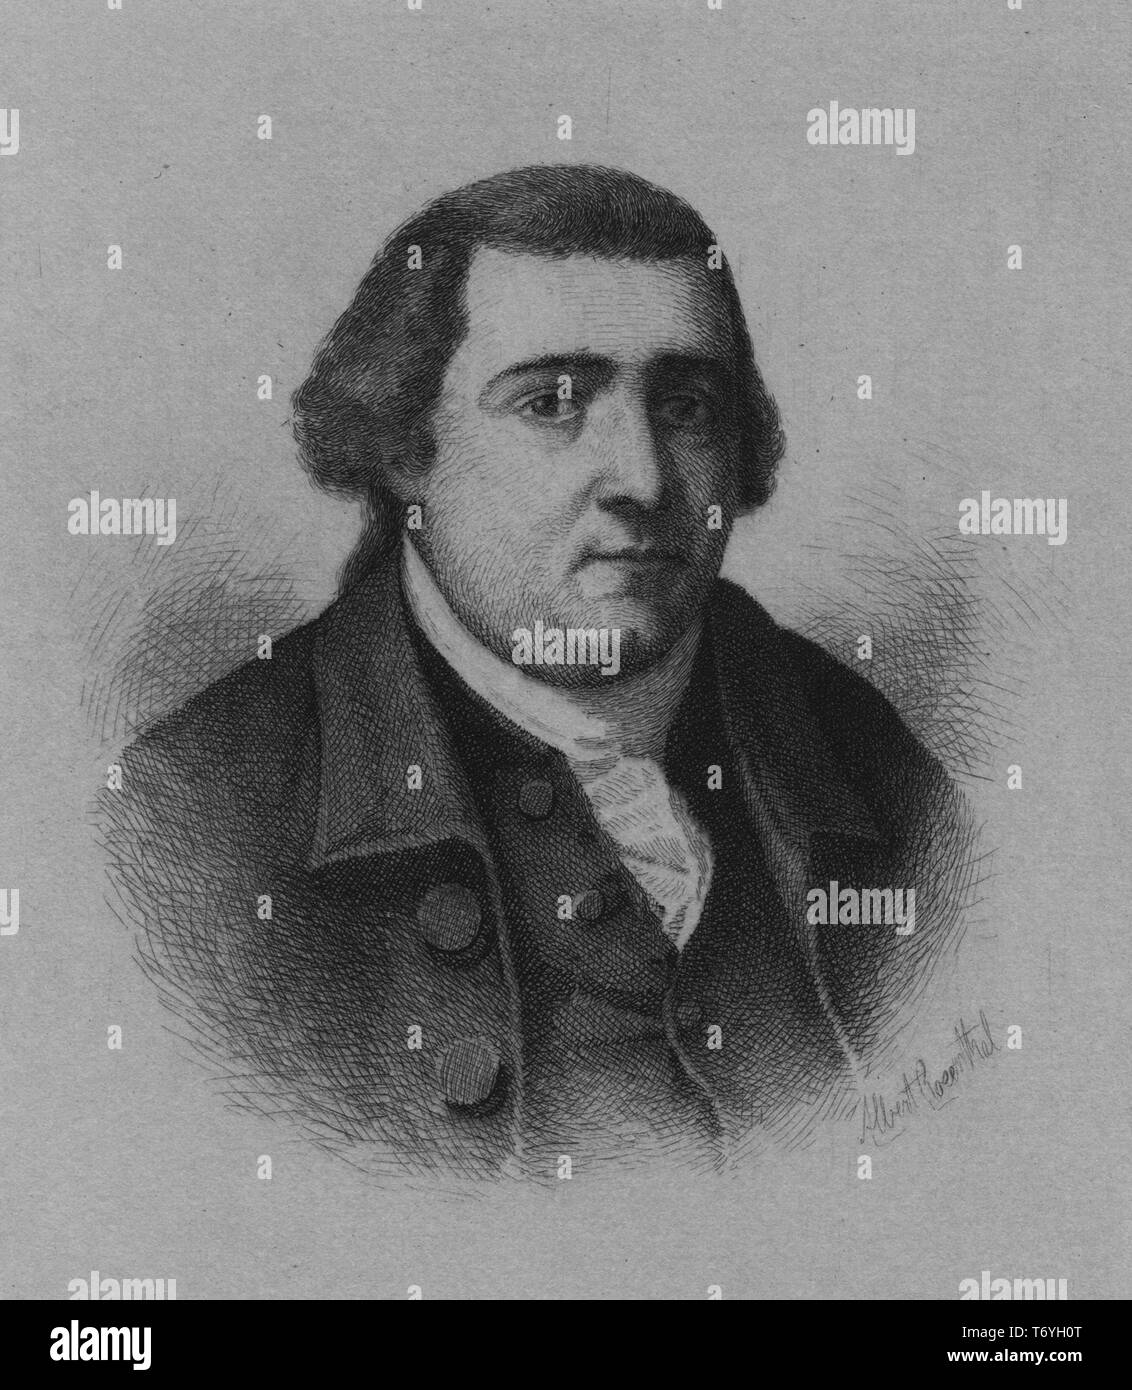 Engraved portrait of Joseph Trumbull, the first commissary general of the Continental Army and member of the Continental Congress, an American lawyer, banker, and politician from Lebanon, Connecticut, 1885. From the New York Public Library. () Stock Photo